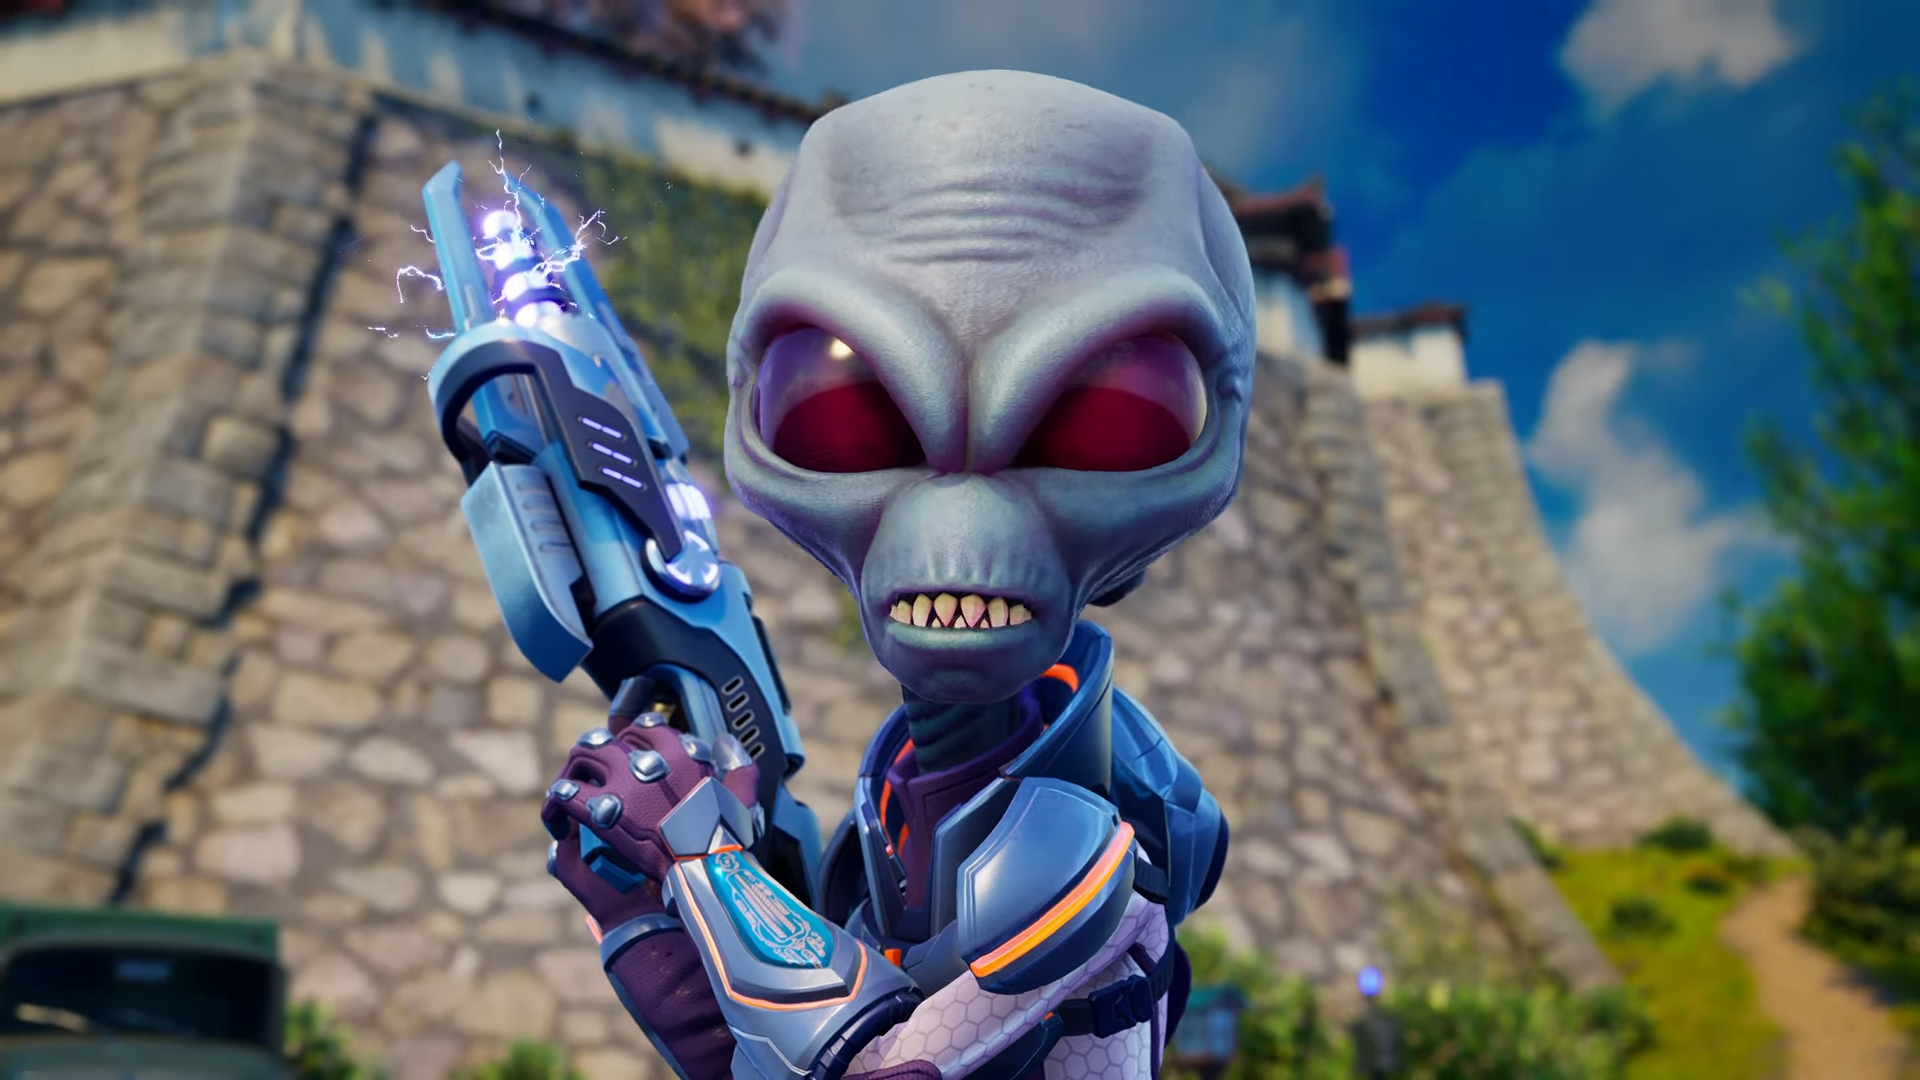 Destroy all Humans 2 reprobed. Destroy all Humans! (2020). Destroy all Humans оружие. Destroy all Humans 2 2006. Destroy all humans reprobed